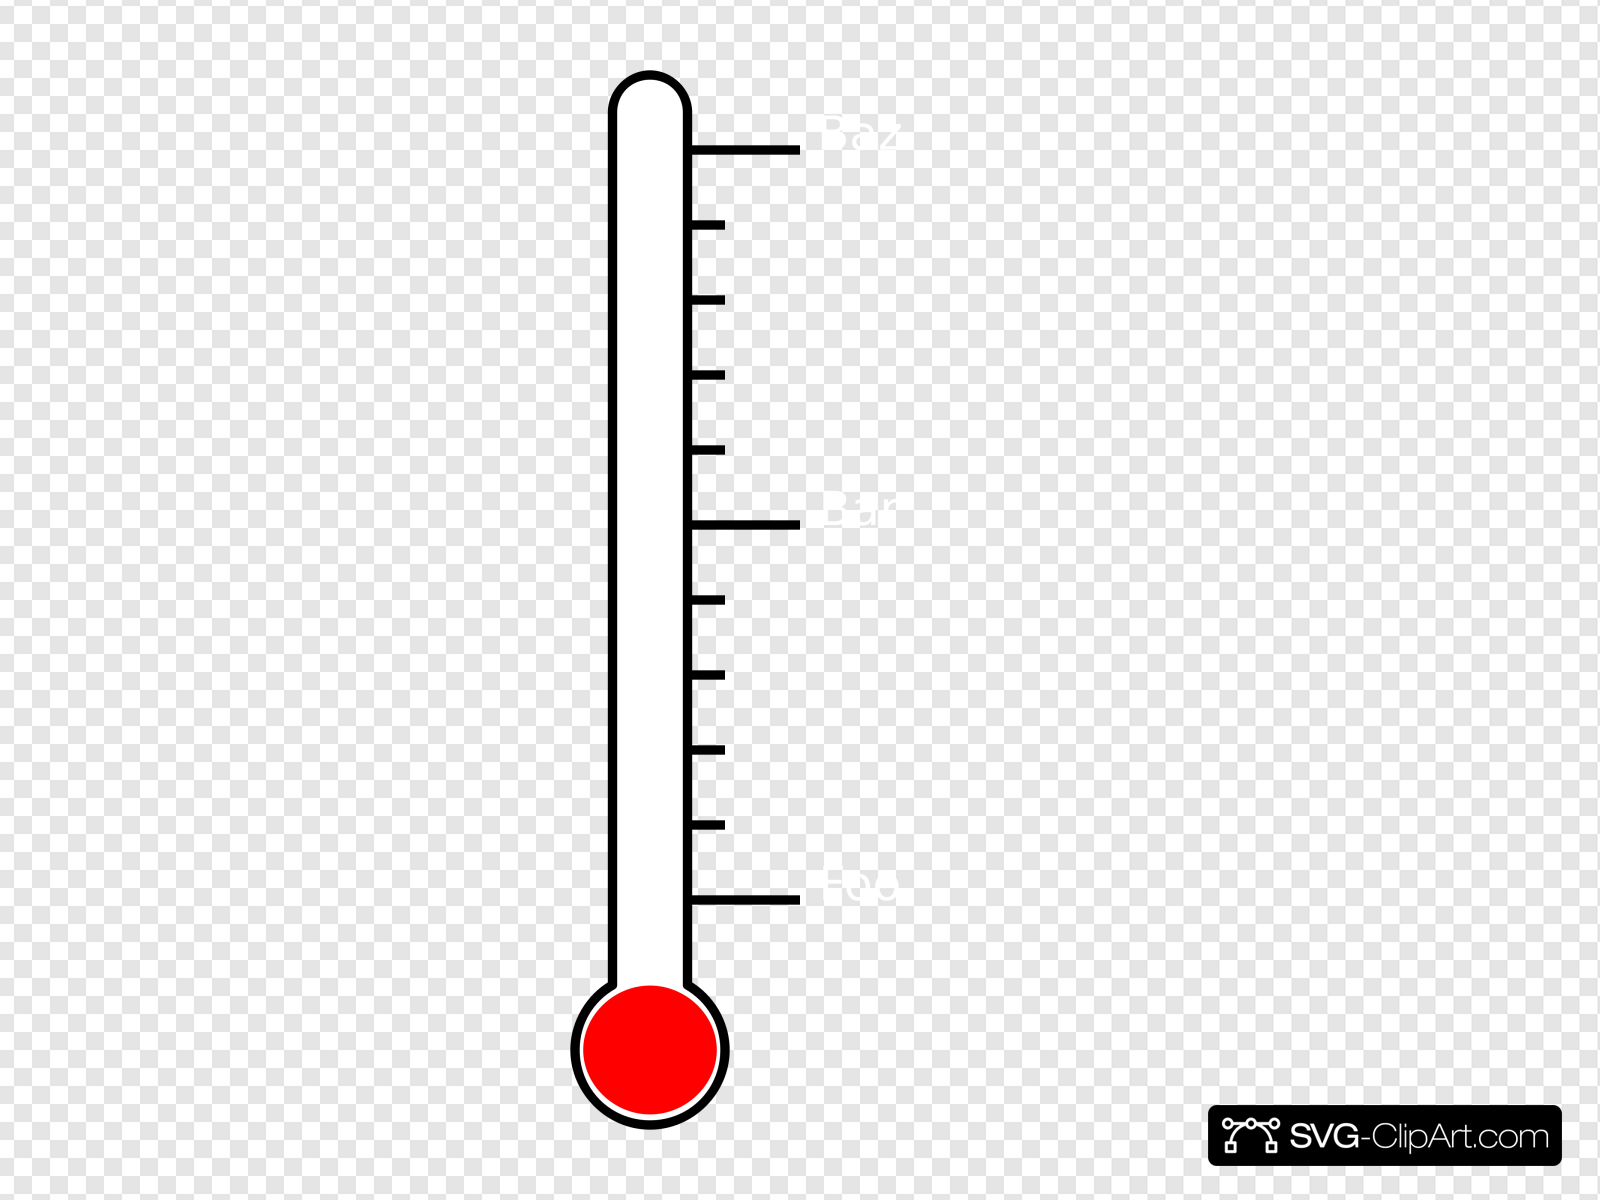 Blank Thermometer Clip art, Icon and SVG